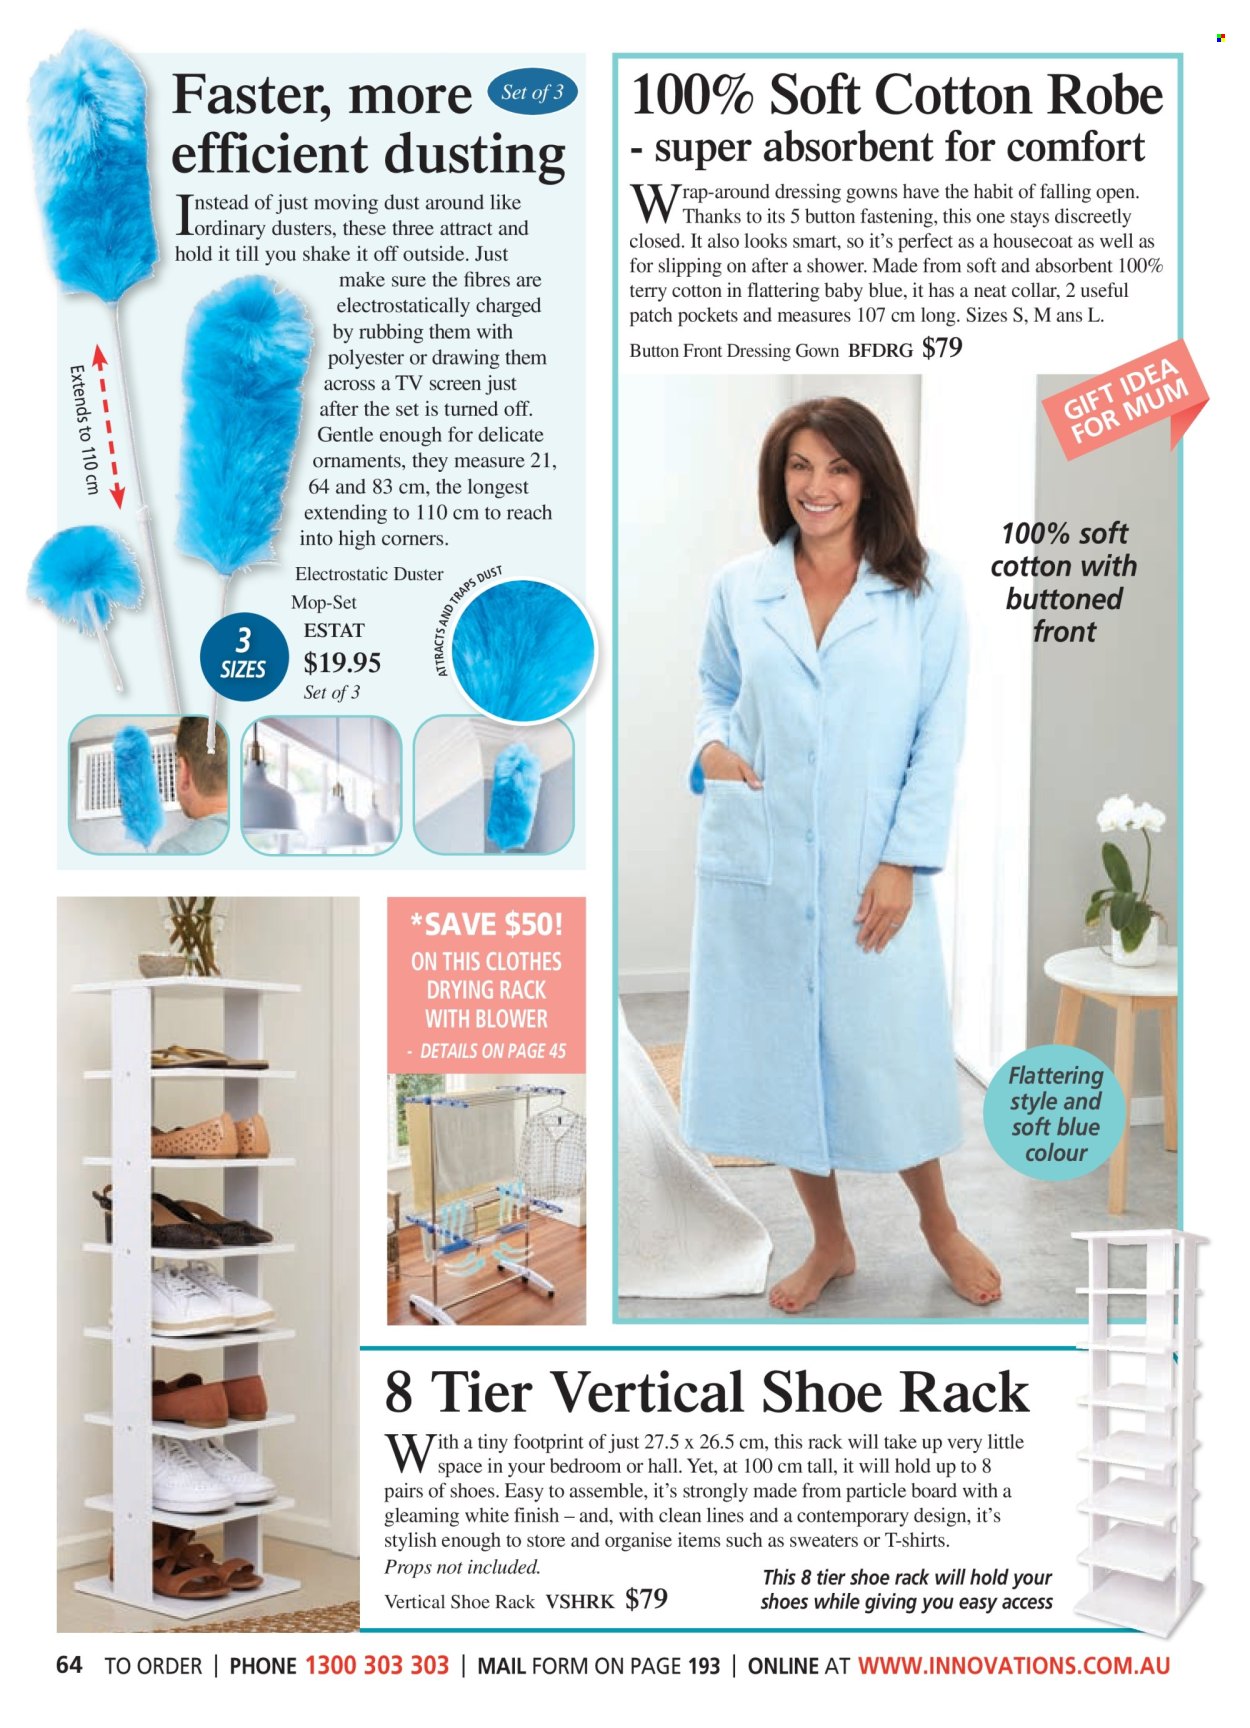 thumbnail - Innovations Catalogue - Sales products - drying rack, mop, duster, dressing gown, t-shirt, robe. Page 64.